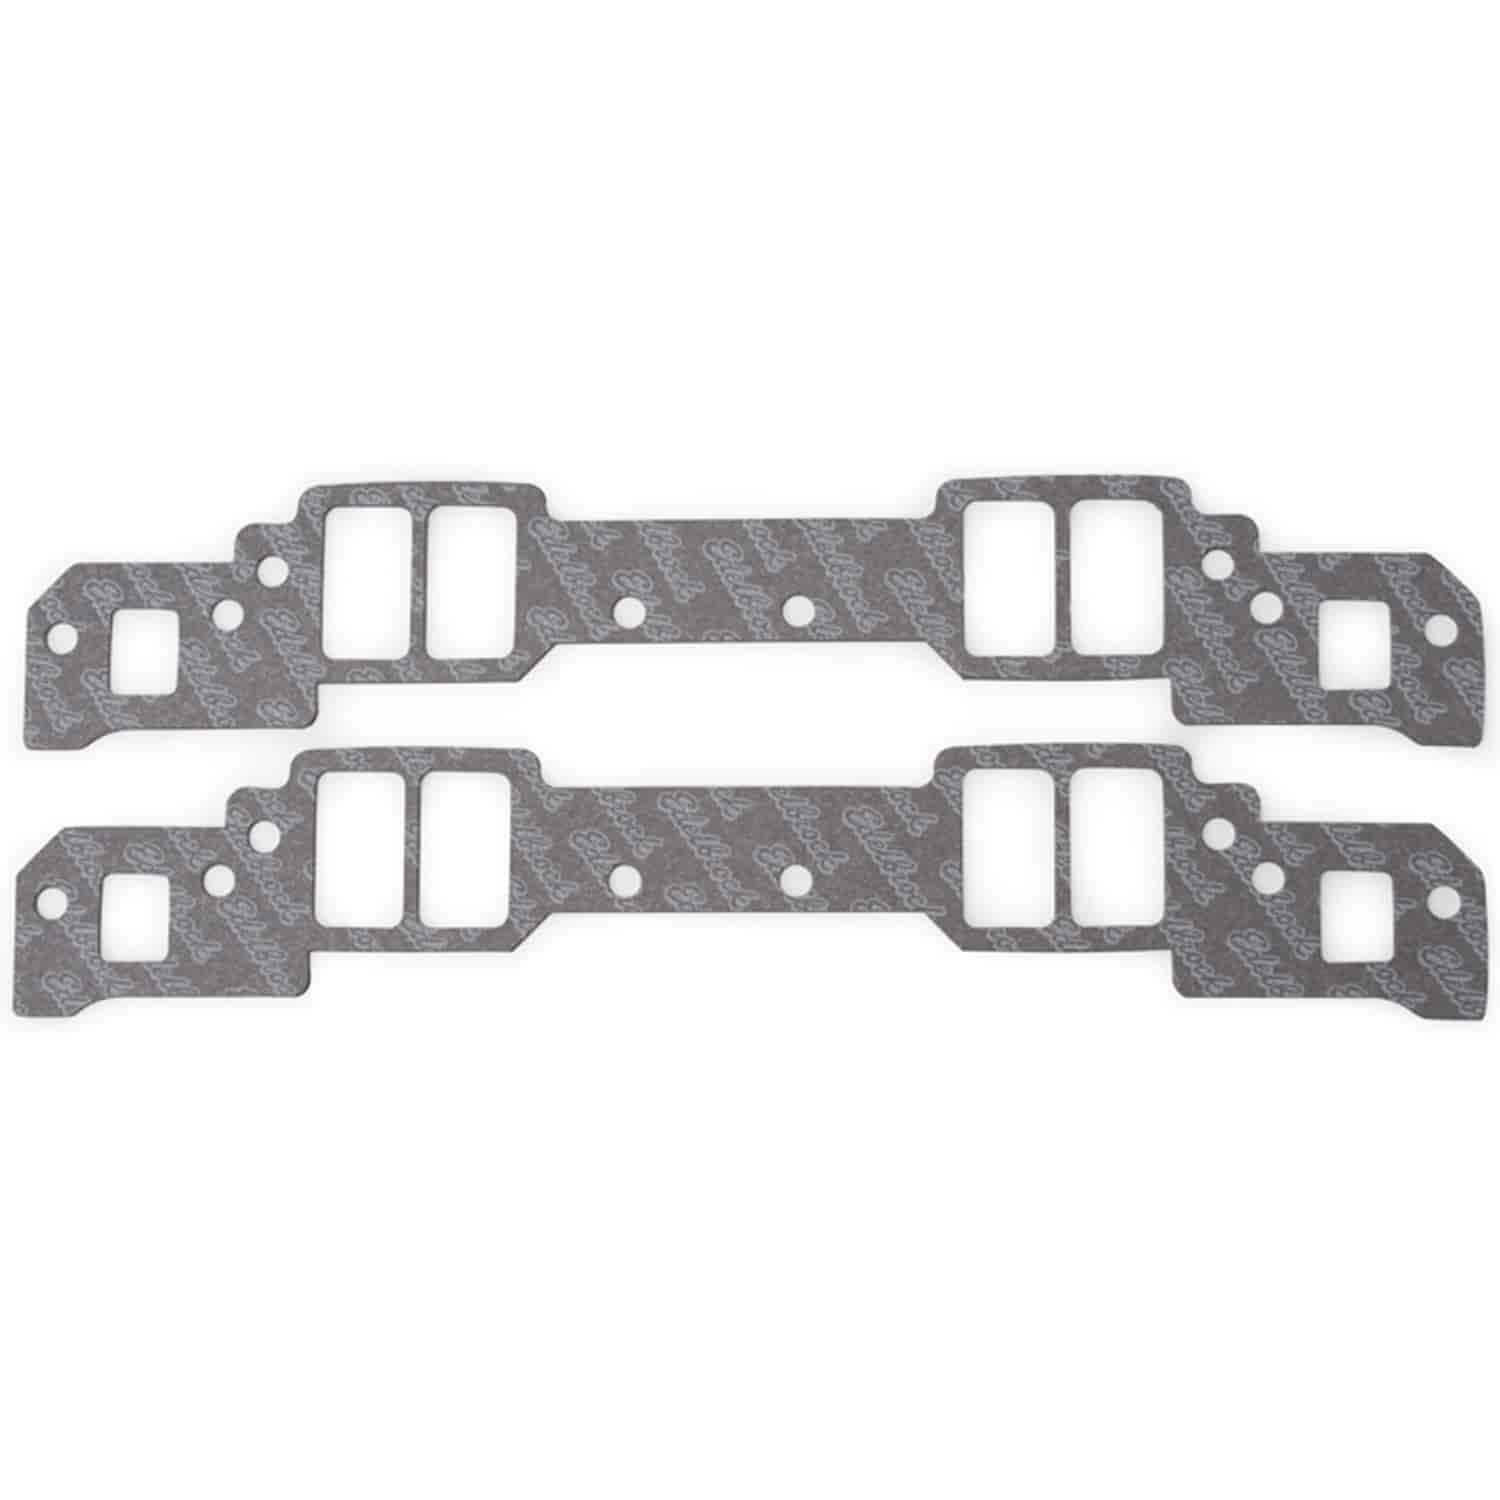 Intake Gaskets for Small Block Chevy with 18 Degree High Port Intakes